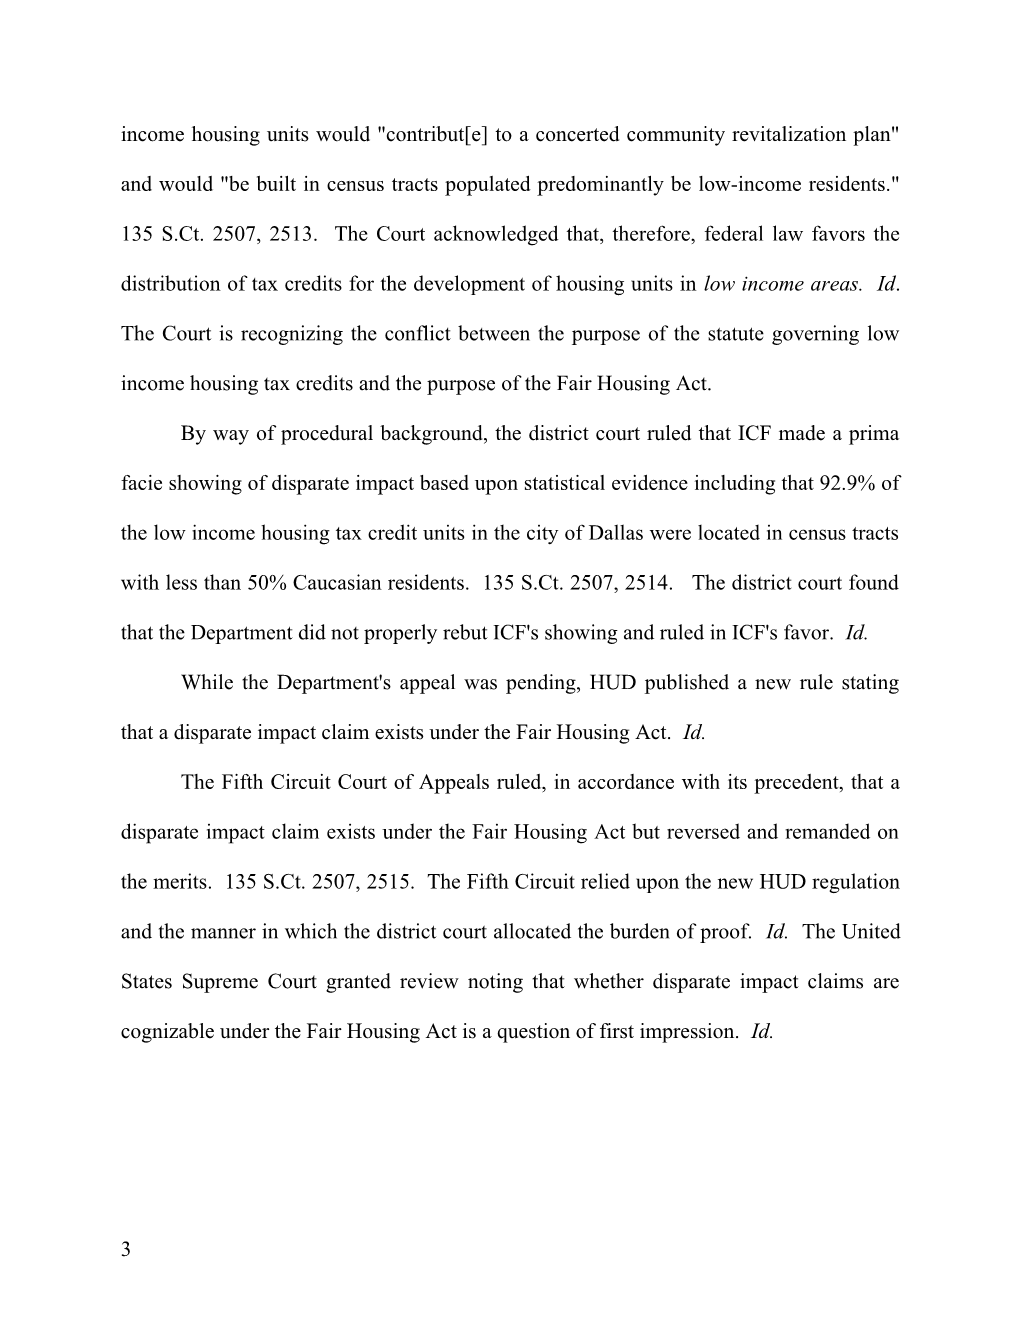 The United States Supreme Court Opinion in Texas Department of Housing V